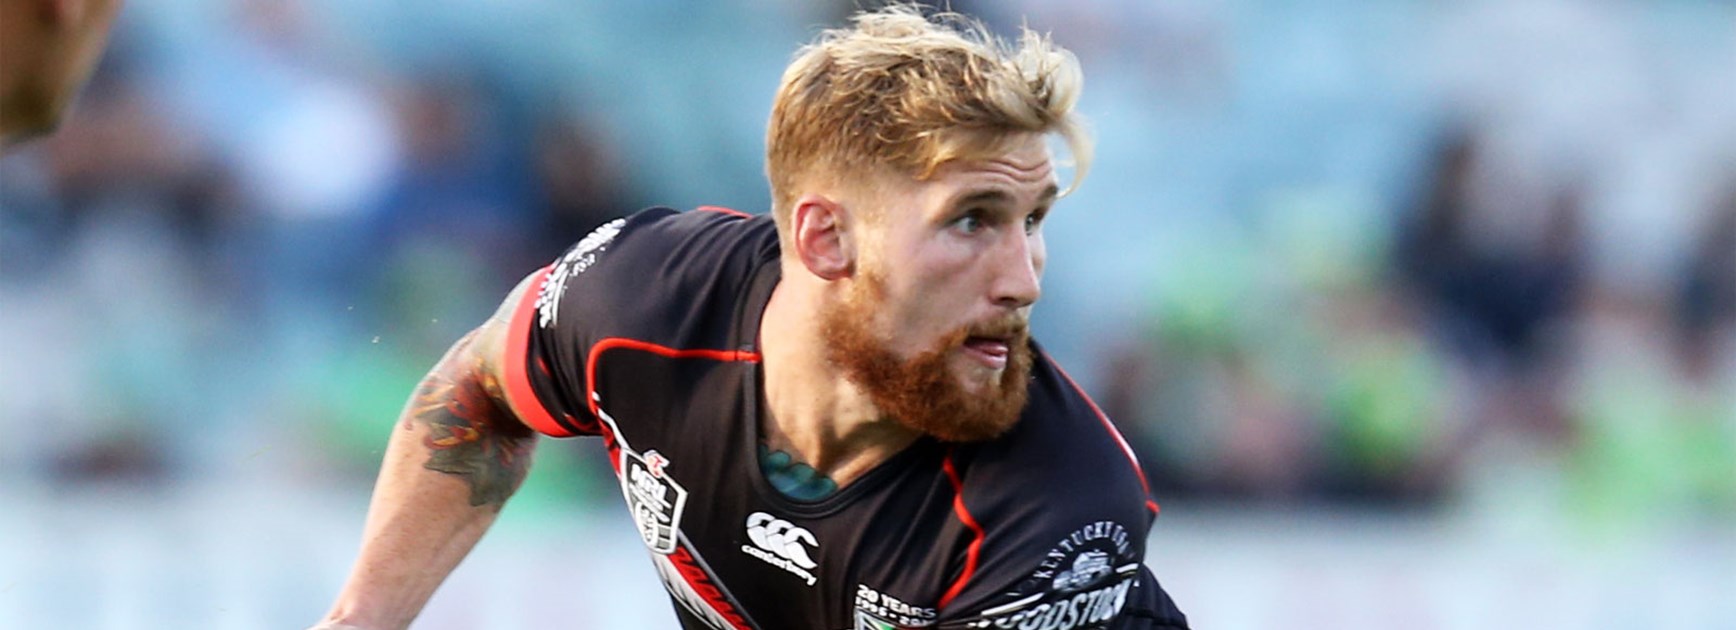 Playing junior rugby league was a little different for Sam Tomkins compared with other NRL stars.